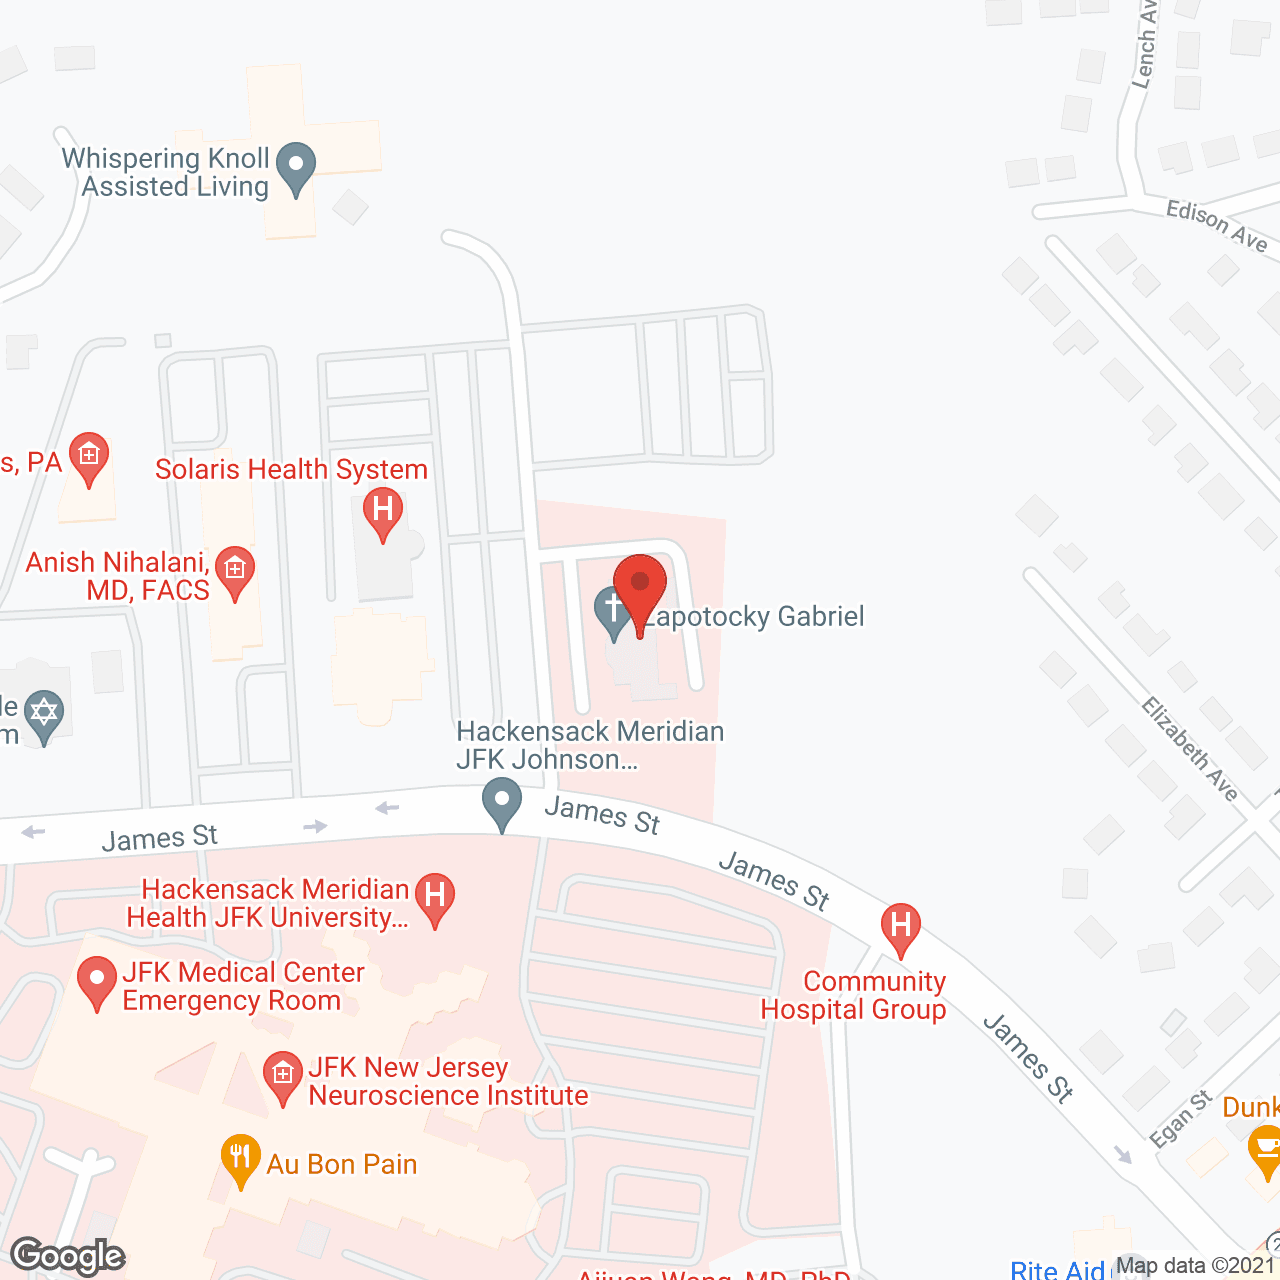 Complete Care at Whispering Woods in google map